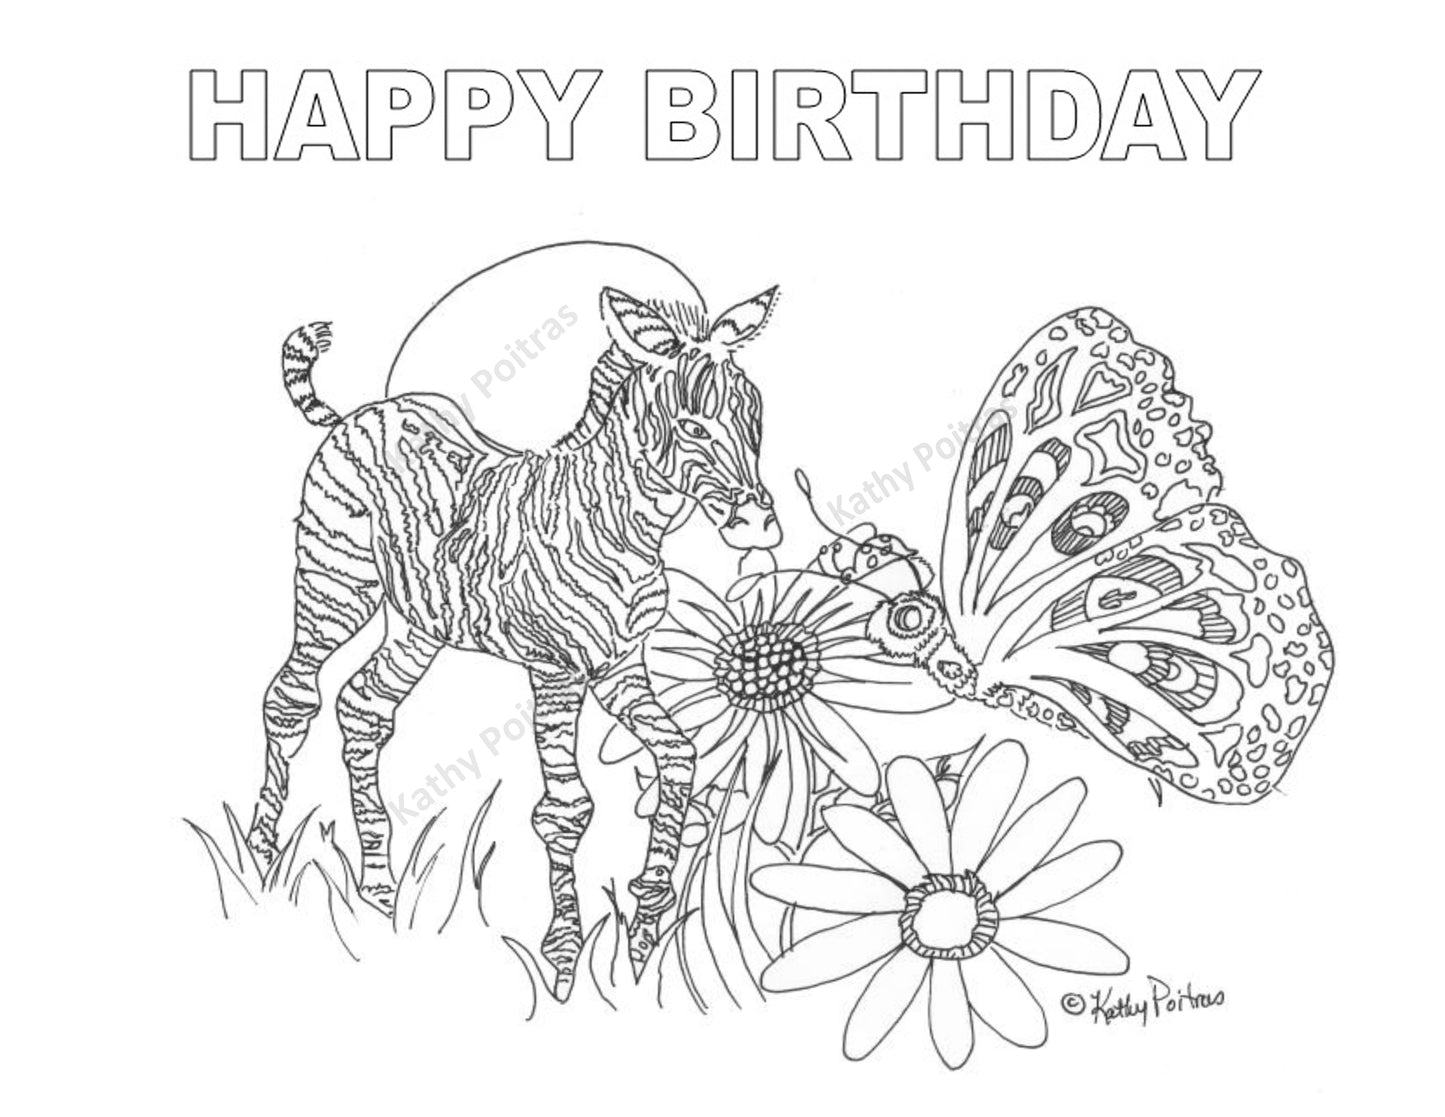 Color Me , Zebra, Butterfly and Ladybug XL 8.5 x 11 inch Birthday or Greeting Card